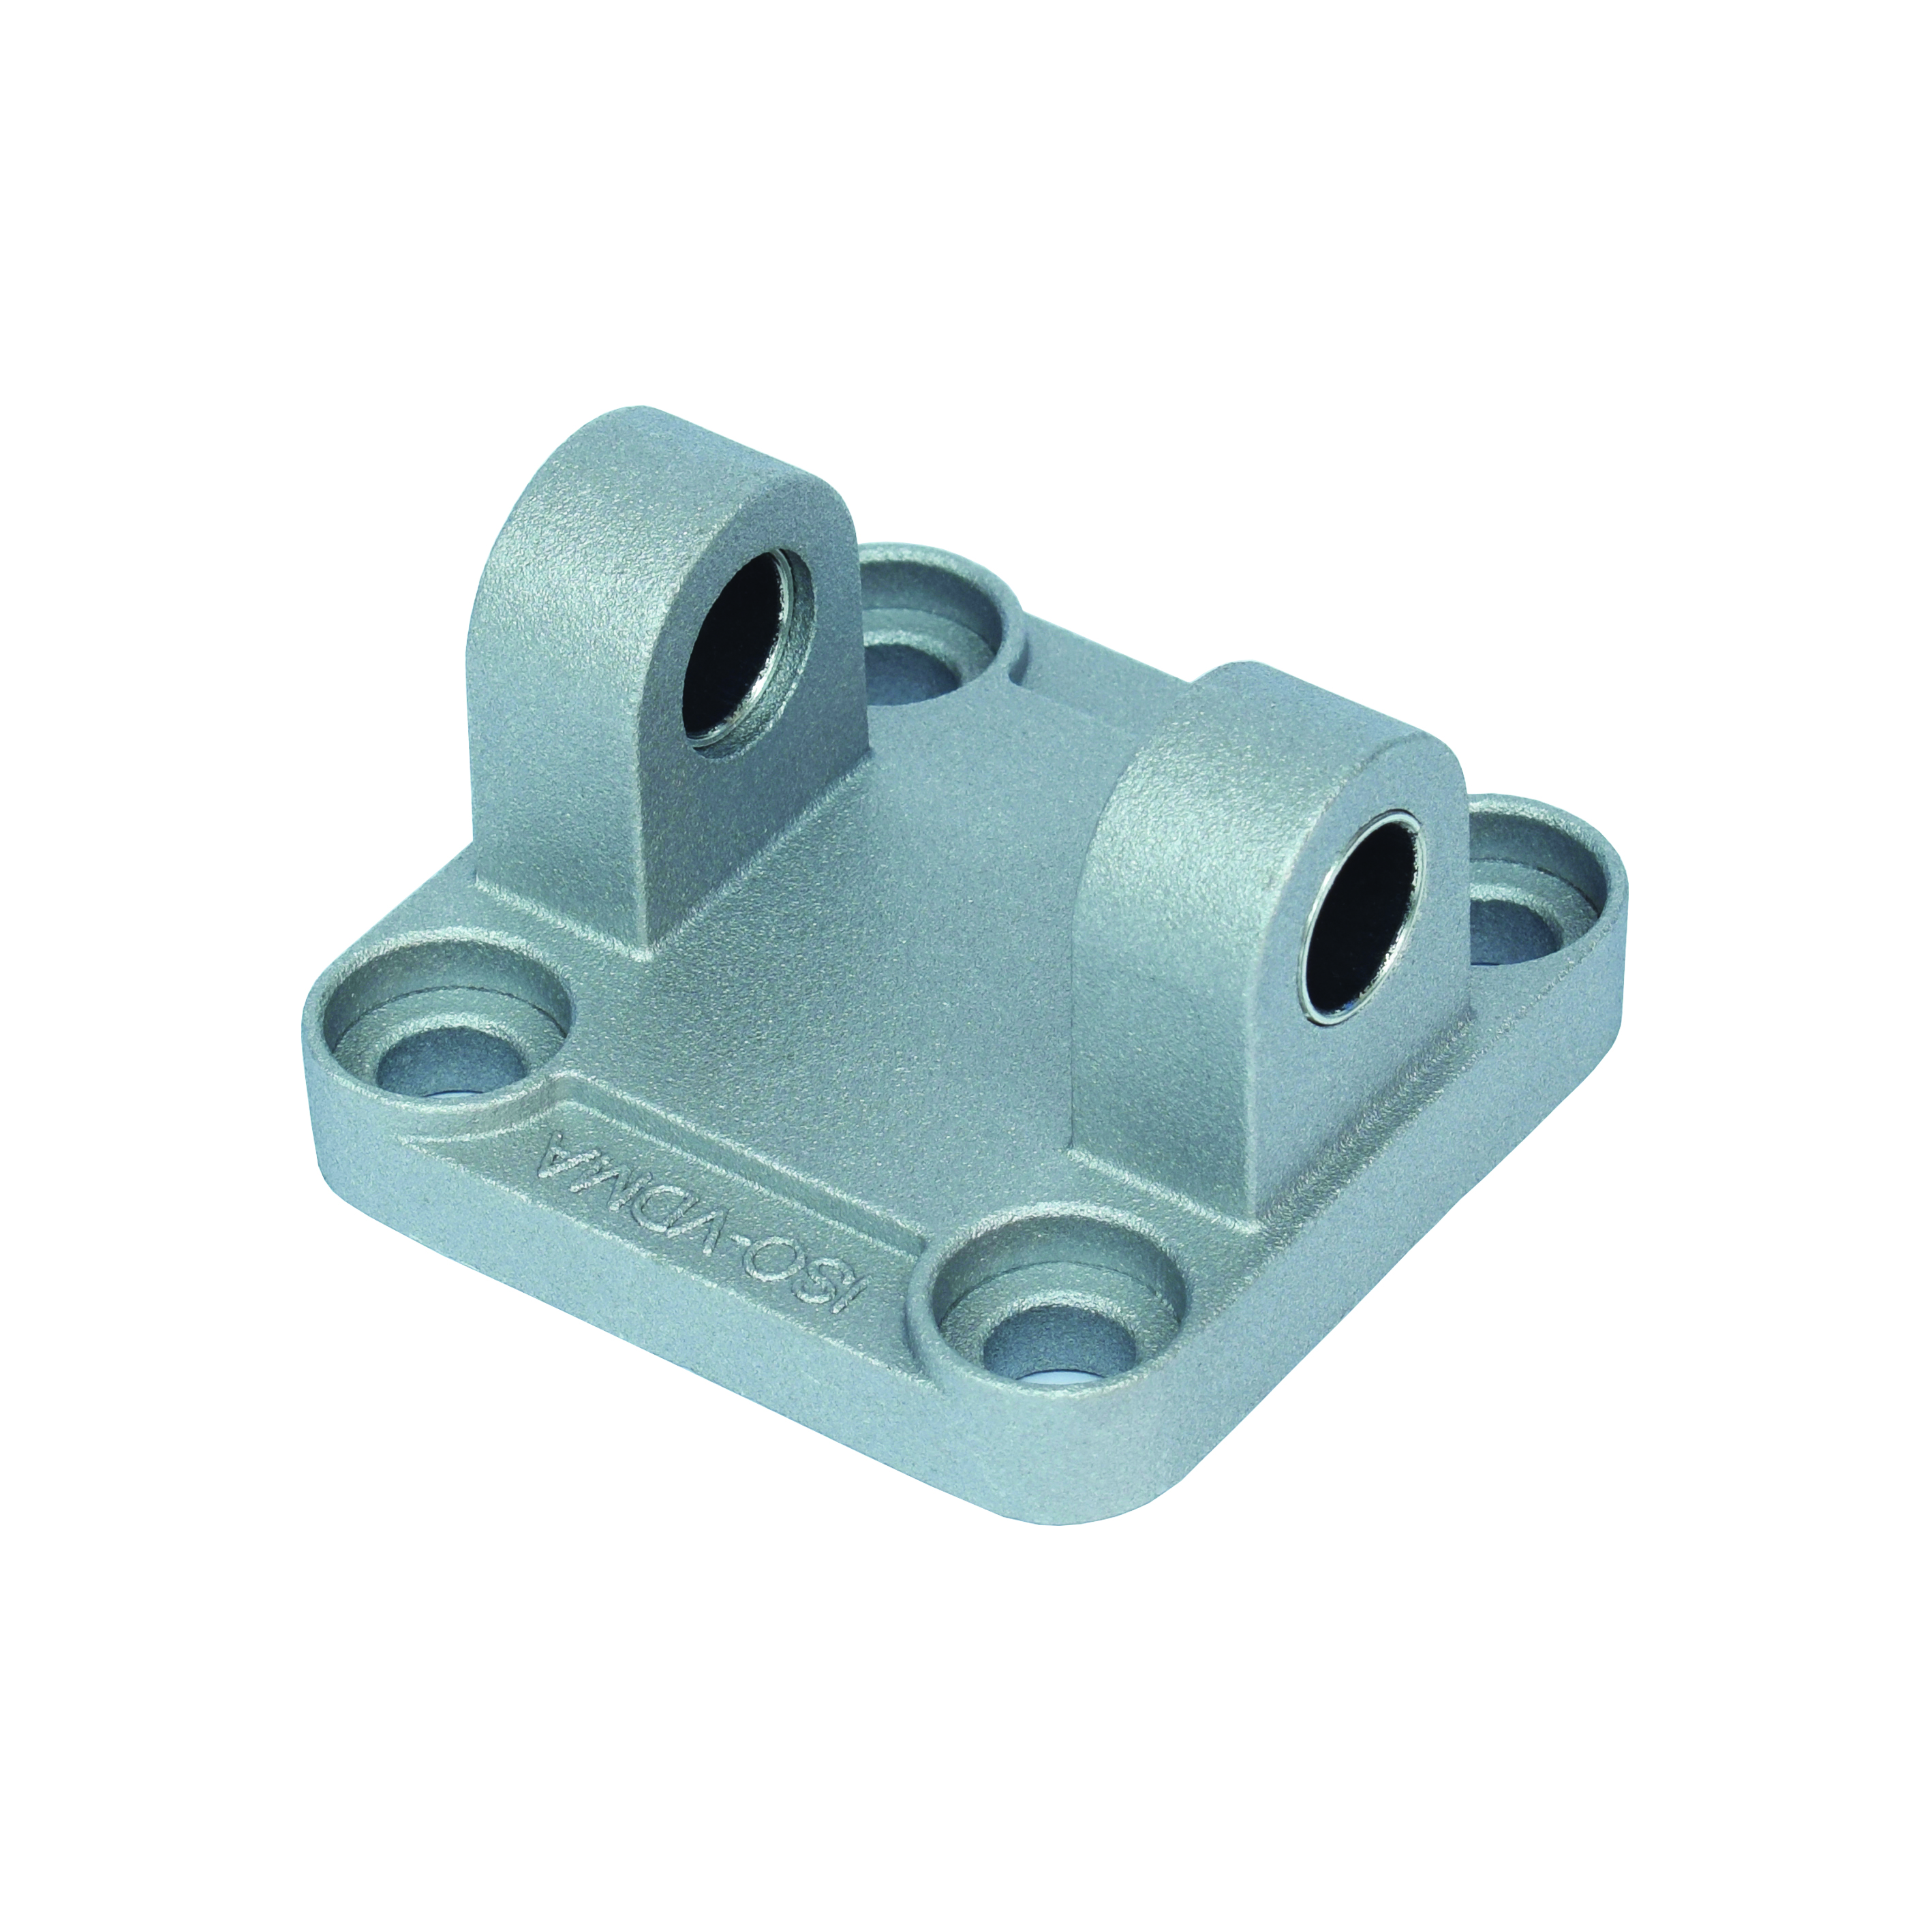 Female rear joints for pneumatic cylinders ISO 15552 Accessories for pneumatic cylinders ISO 15552 